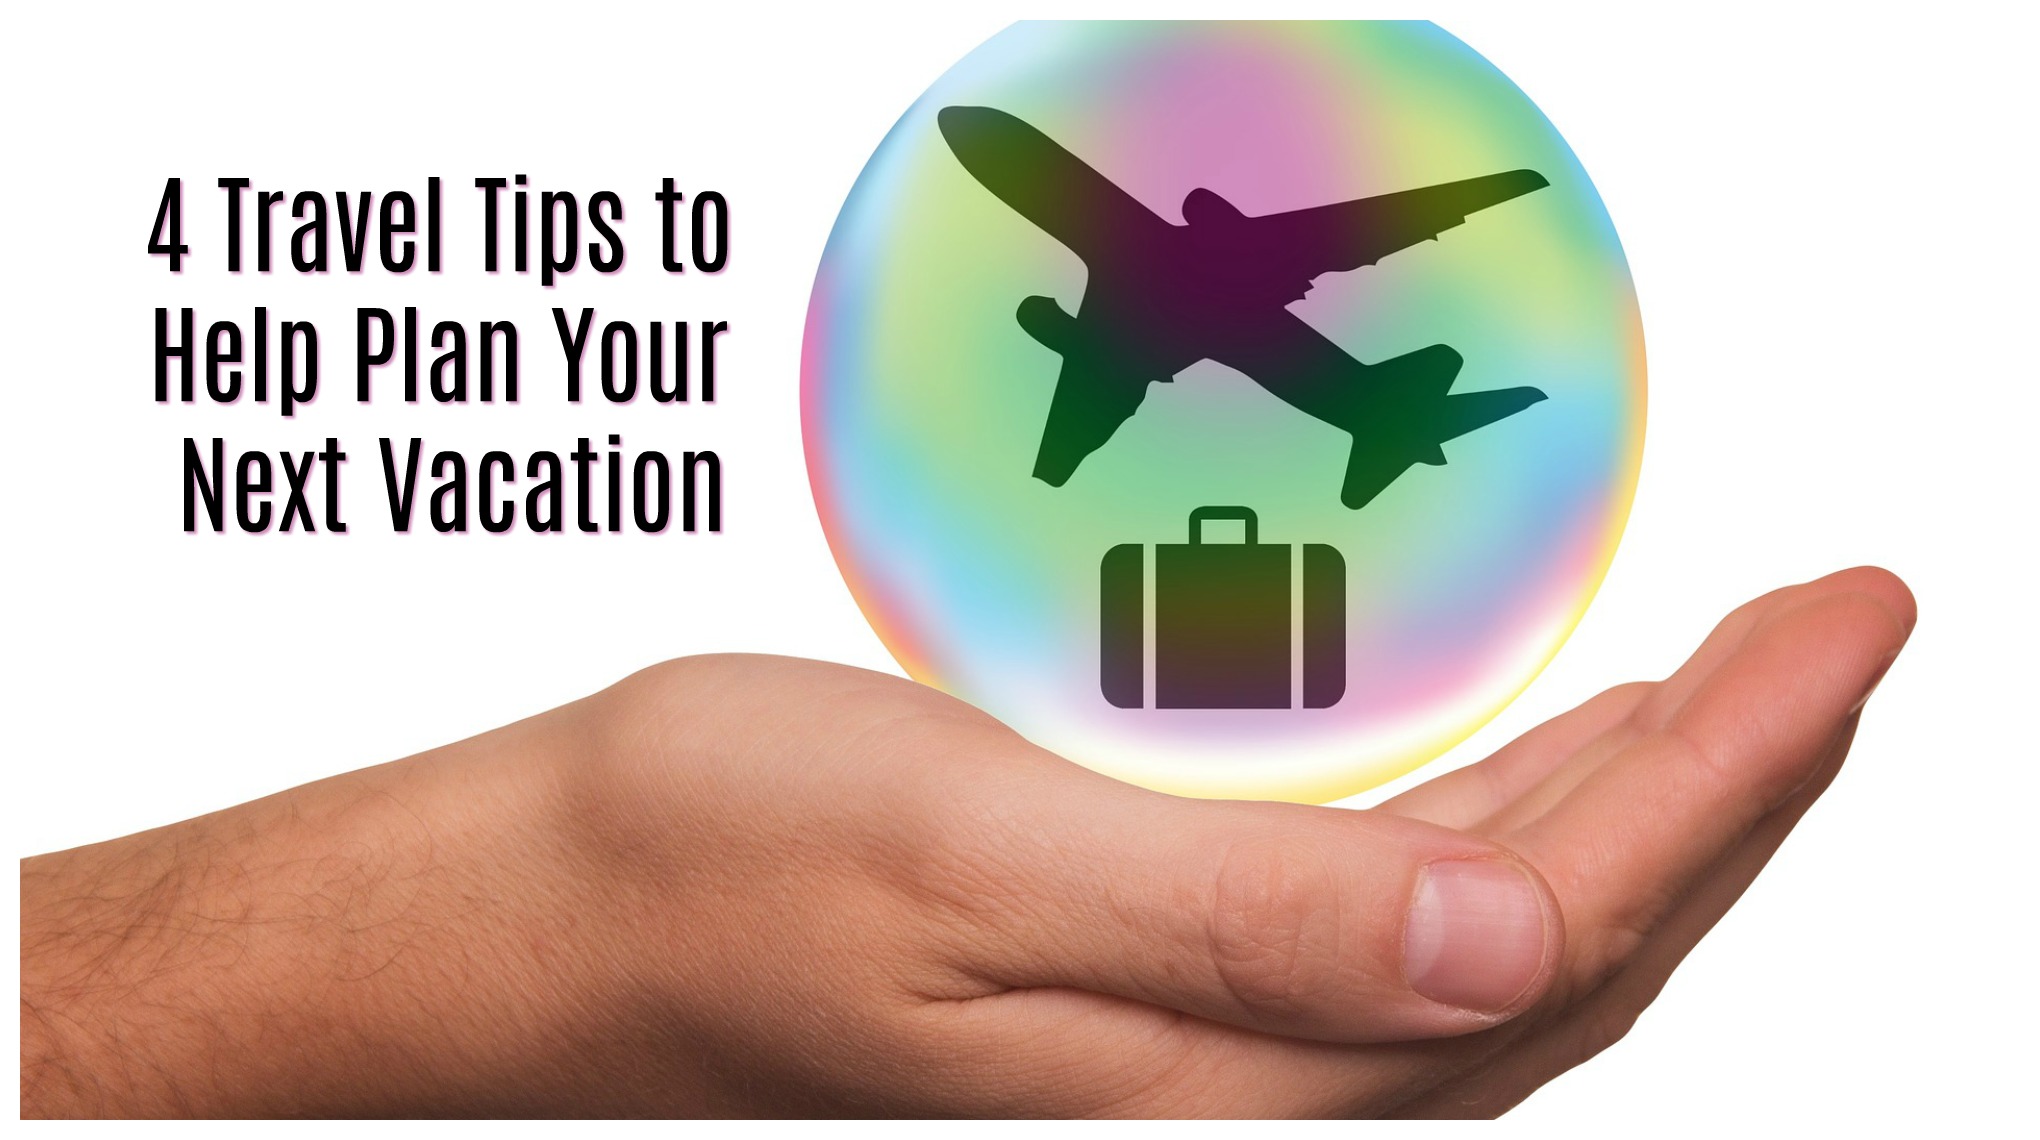 4 Travel Tips to Help Plan Your Next Vacation